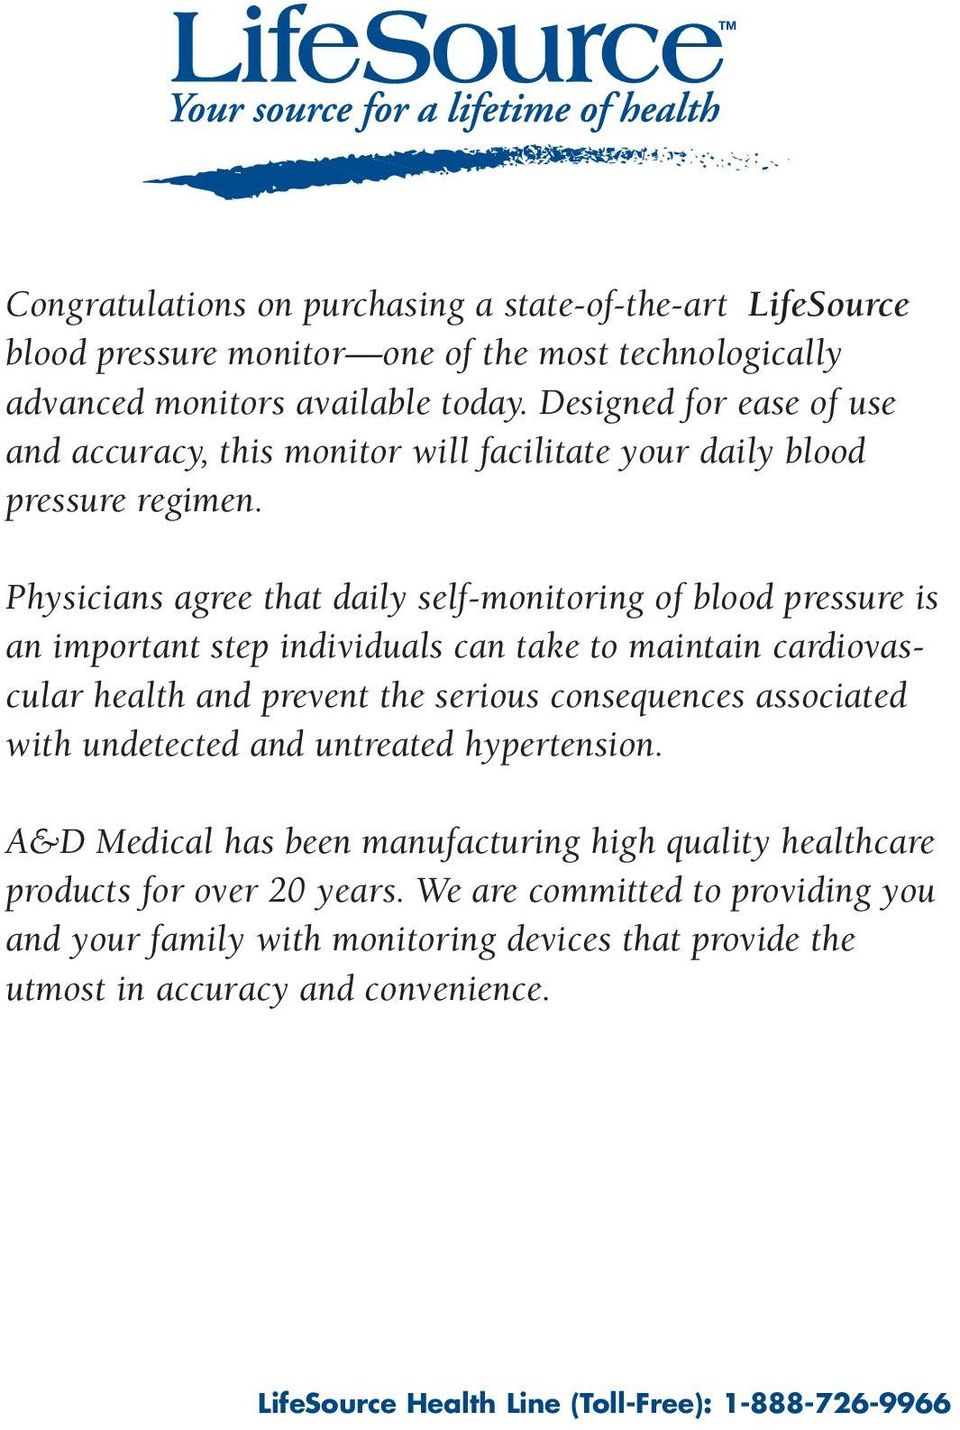 Physicians agree that daily self-monitoring of blood pressure is an important step individuals can take to maintain cardiovascular health and prevent the serious consequences associated